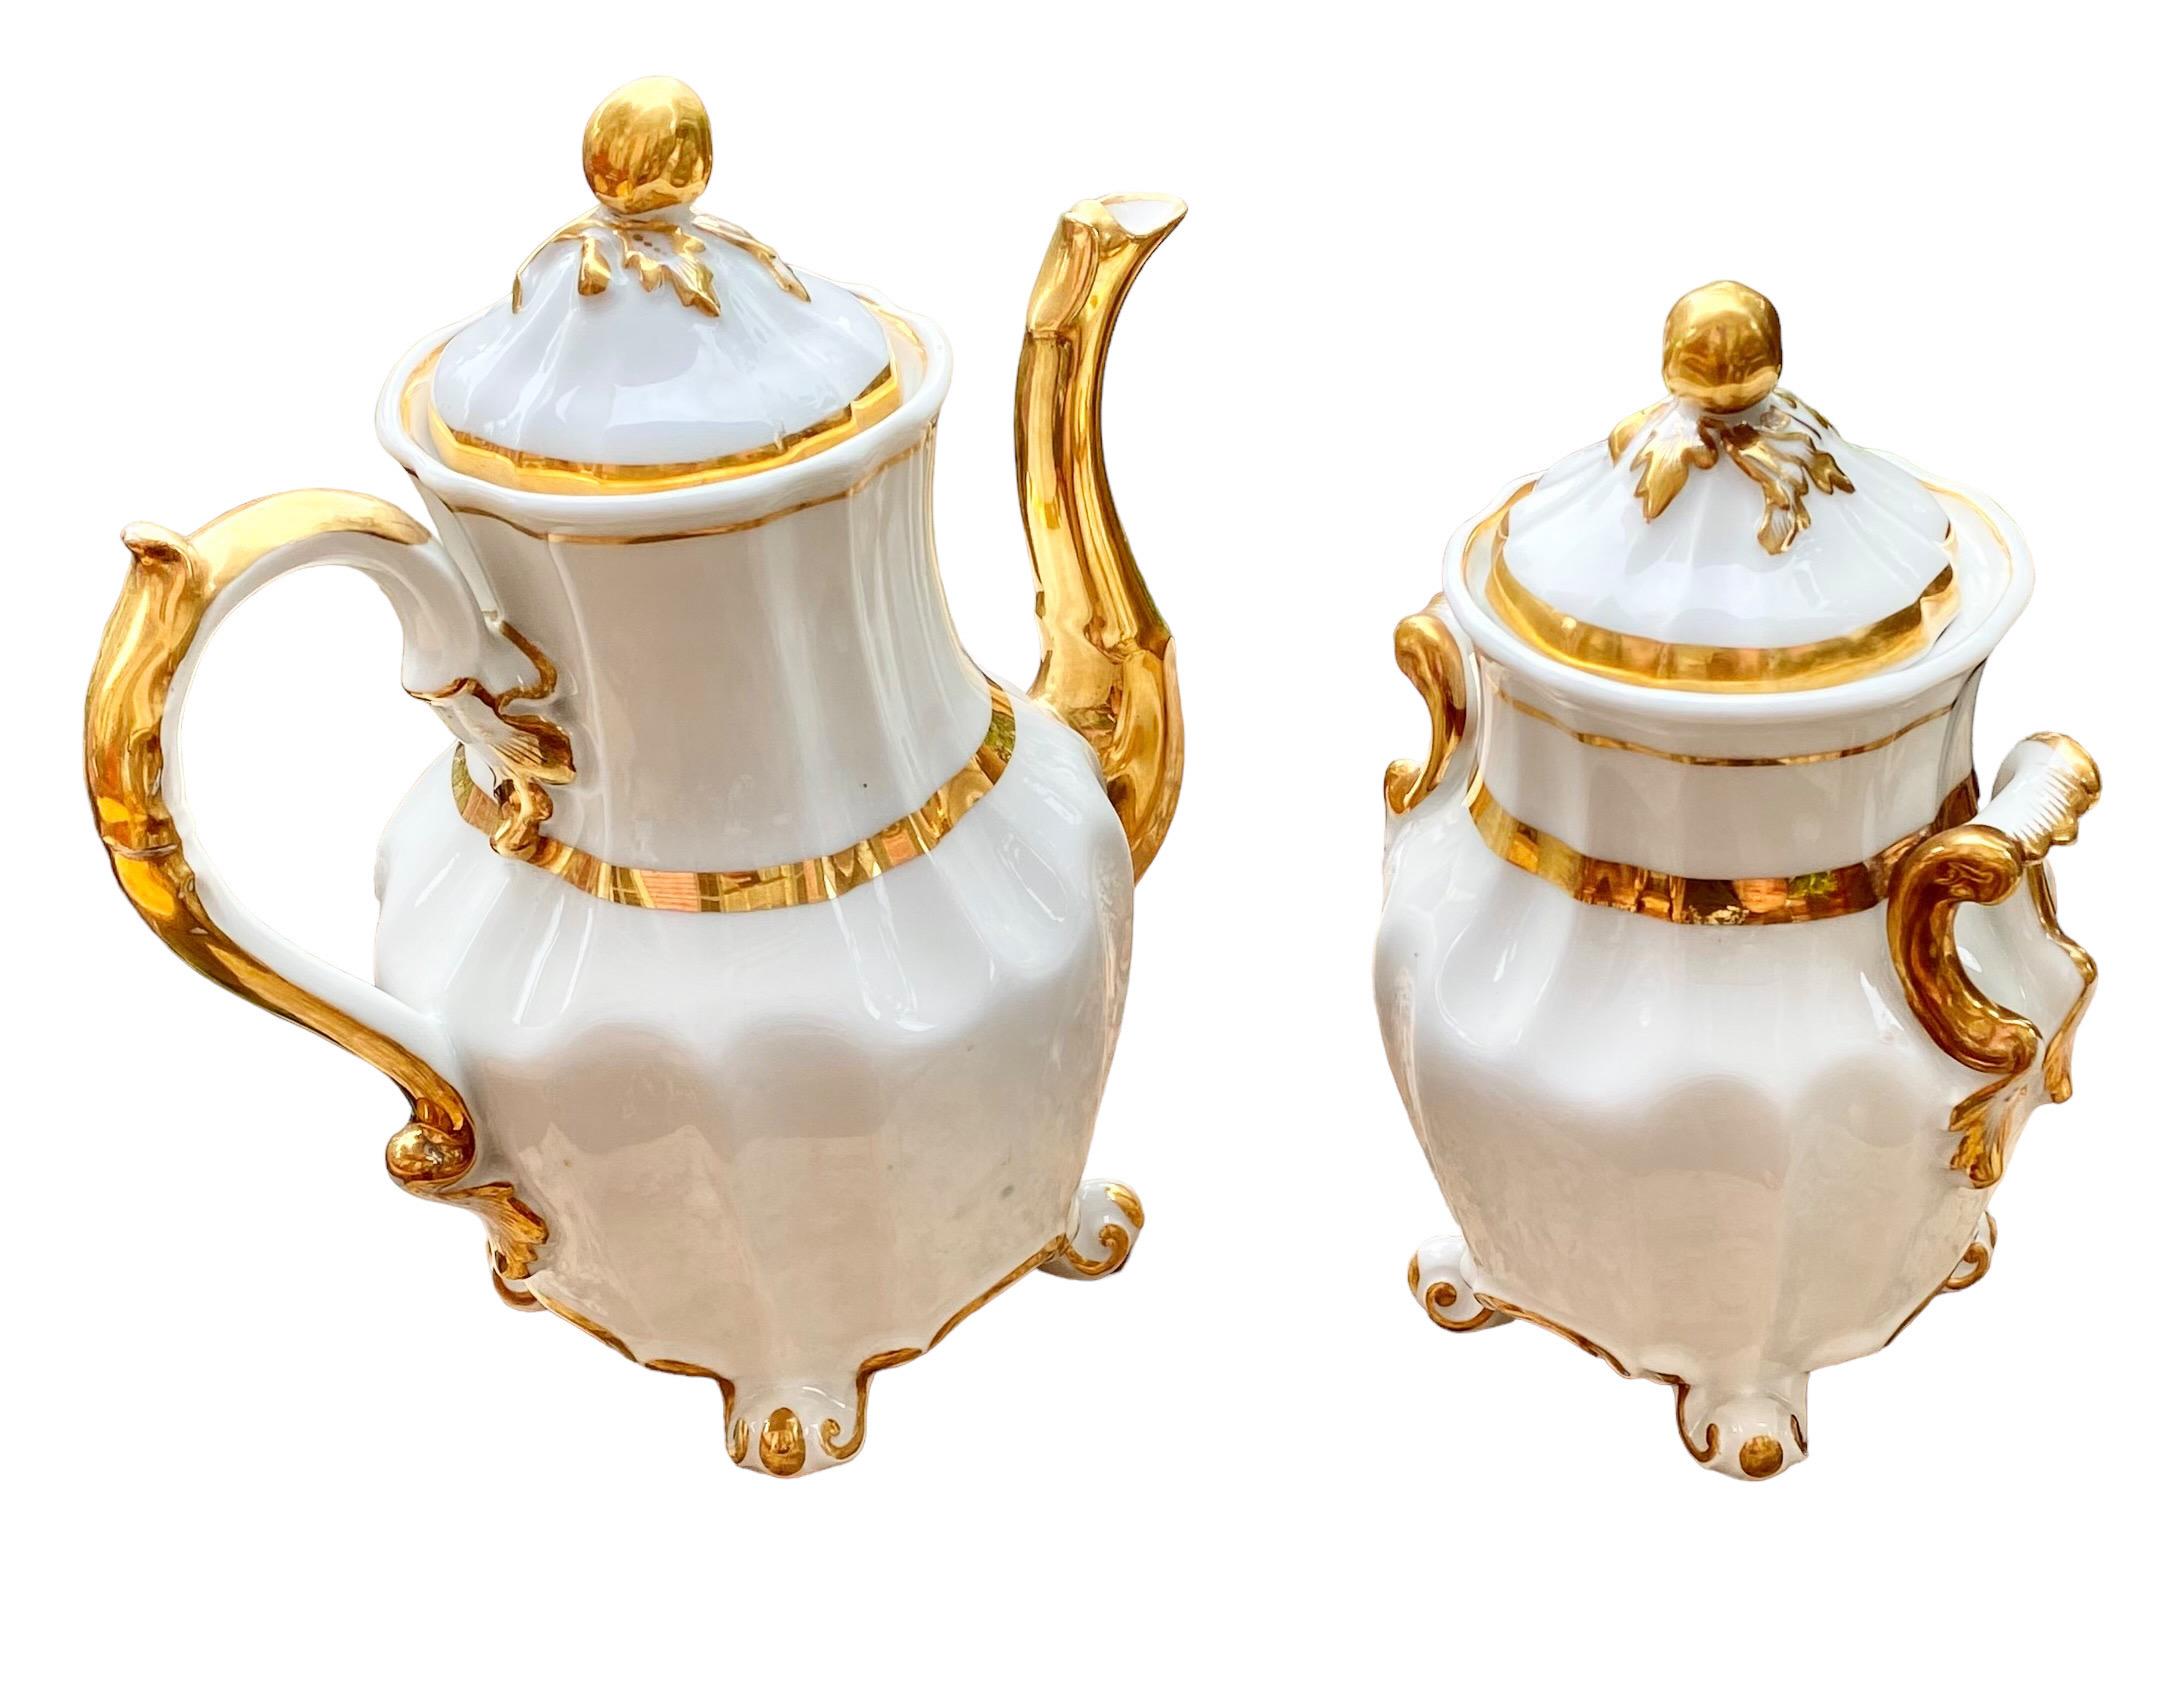 Incredibly scarce and wonderful John Vogt & Cie (pre- Tressemanes & Vogt) Limoges France tall coffee pot and matching large, lidded sugar bowl.
The coffee pot is 10